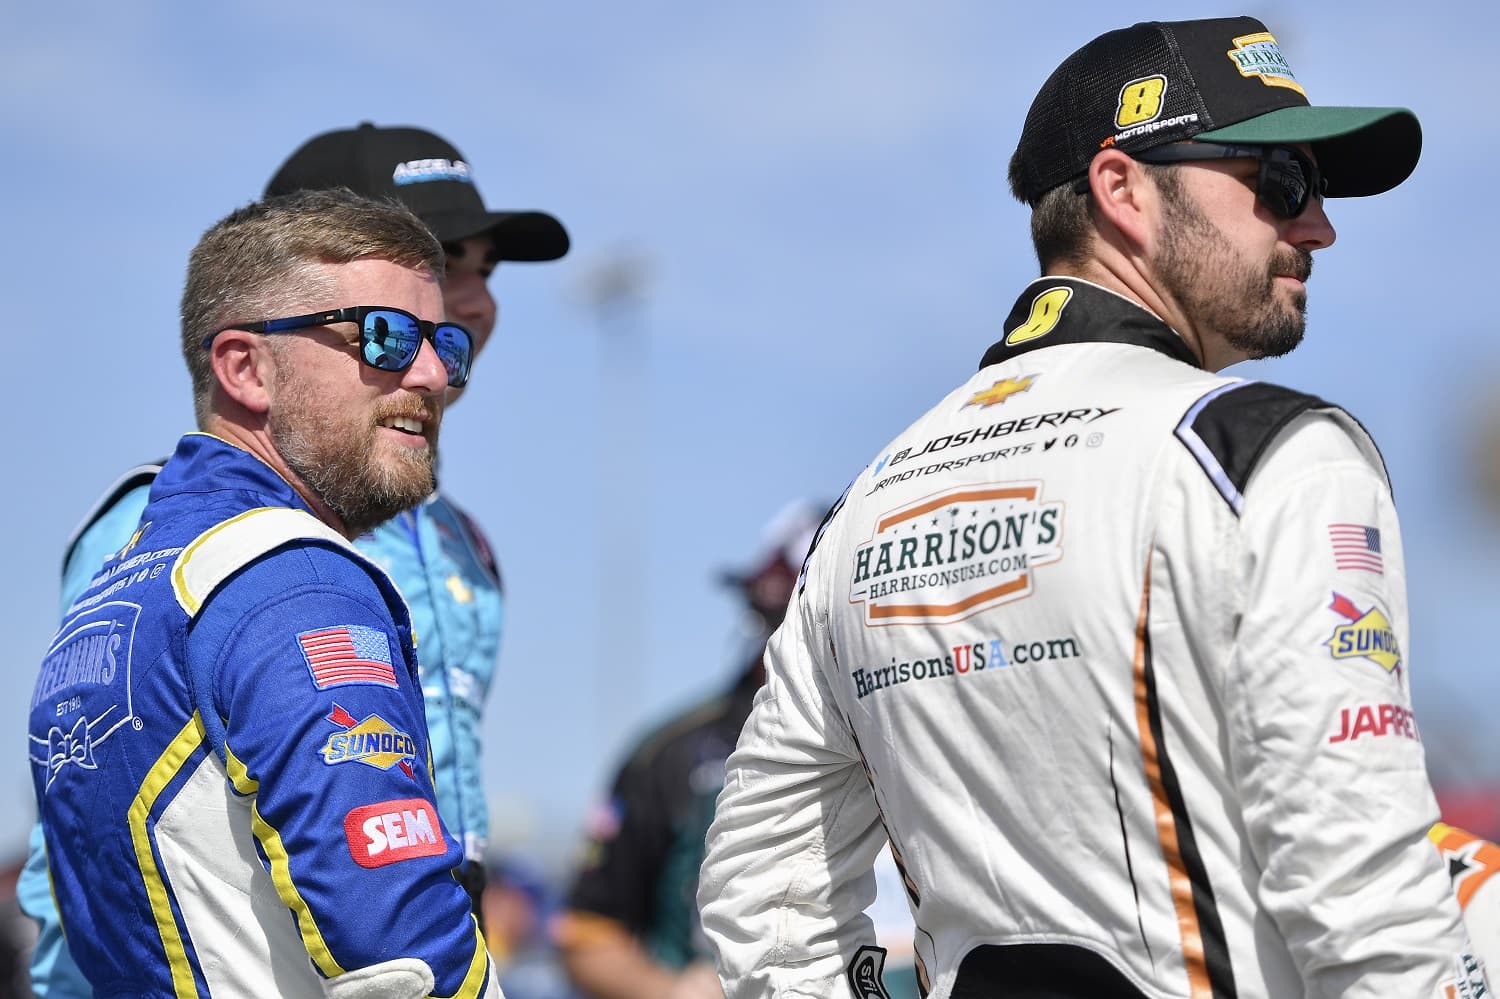 They're back! Justin Allgaier and Josh Berry look on during qualifying for the NASCAR Xfinity Series race at Darlington Raceway on Sept. 3, 2022. | Logan Riely/Getty Images